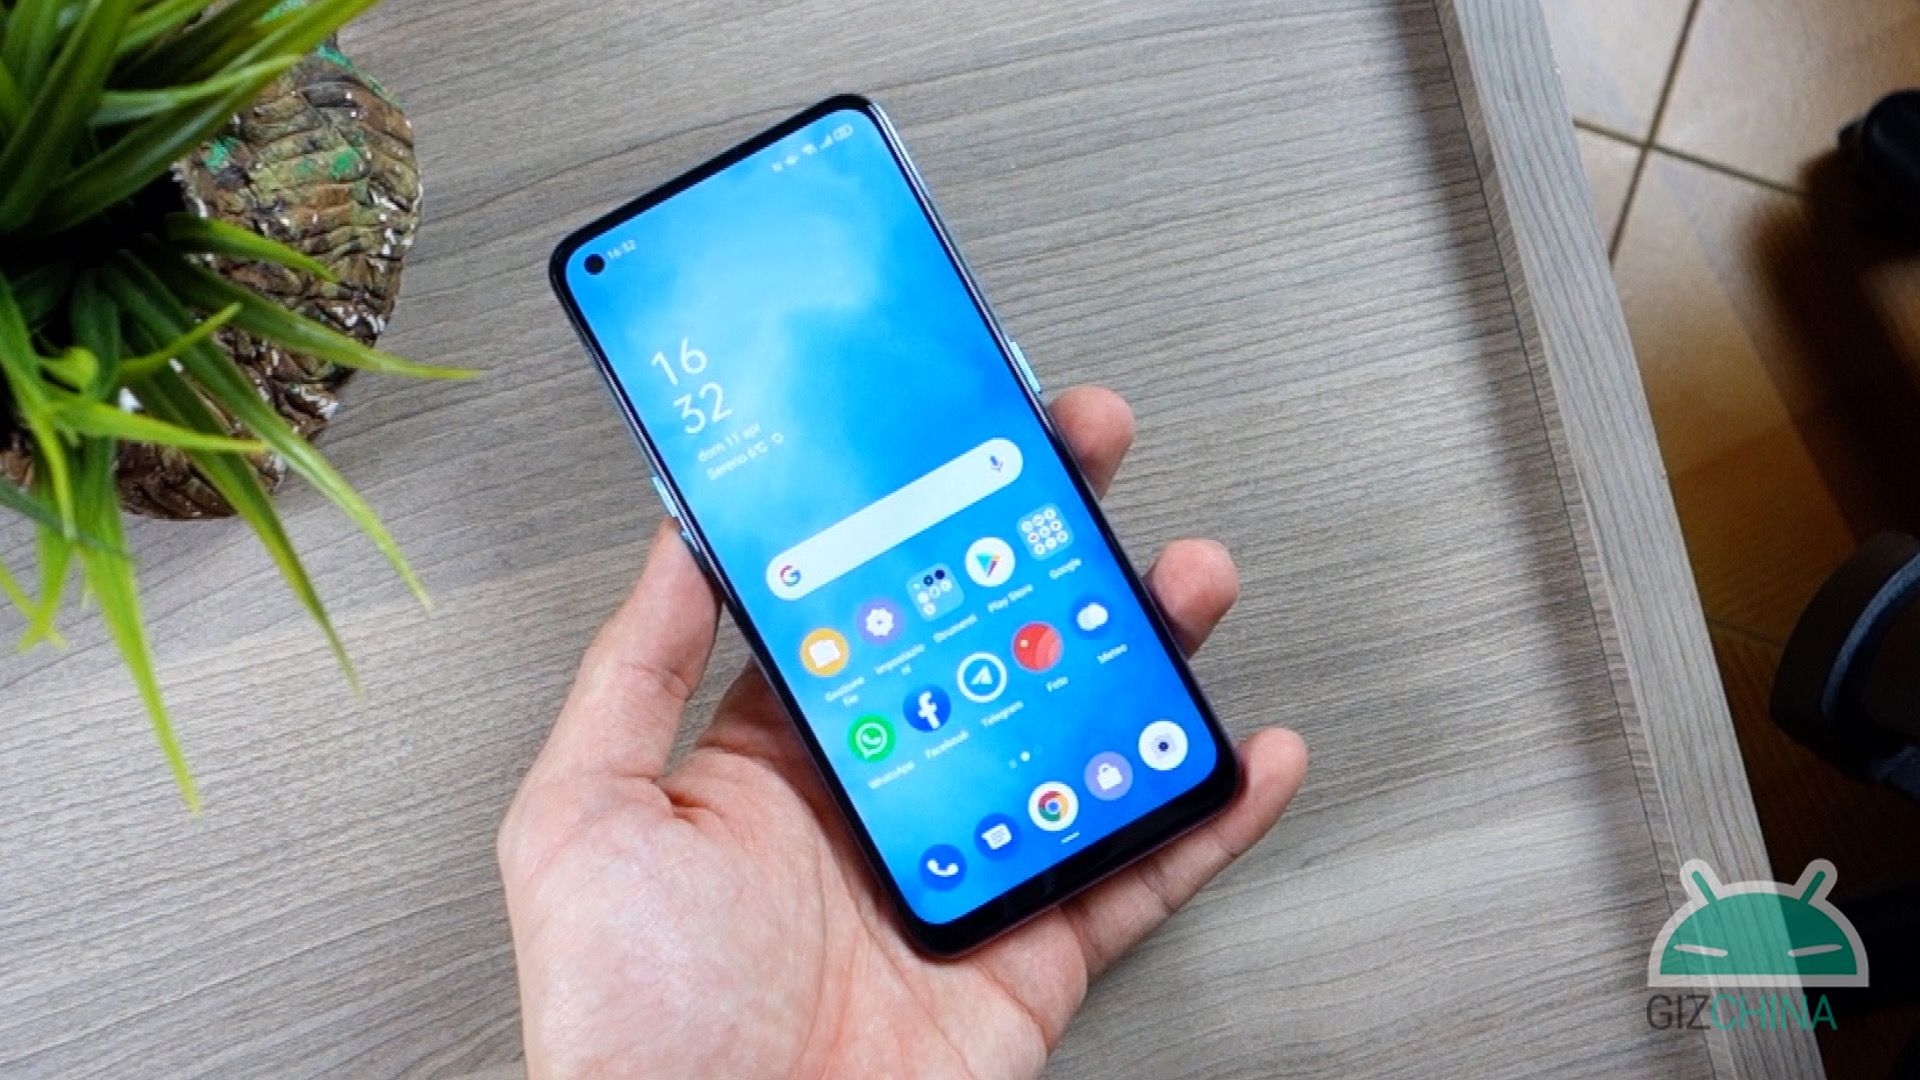 OPPO A94 5G review: it aims high, but it costs less than 400 € - GizChina.it